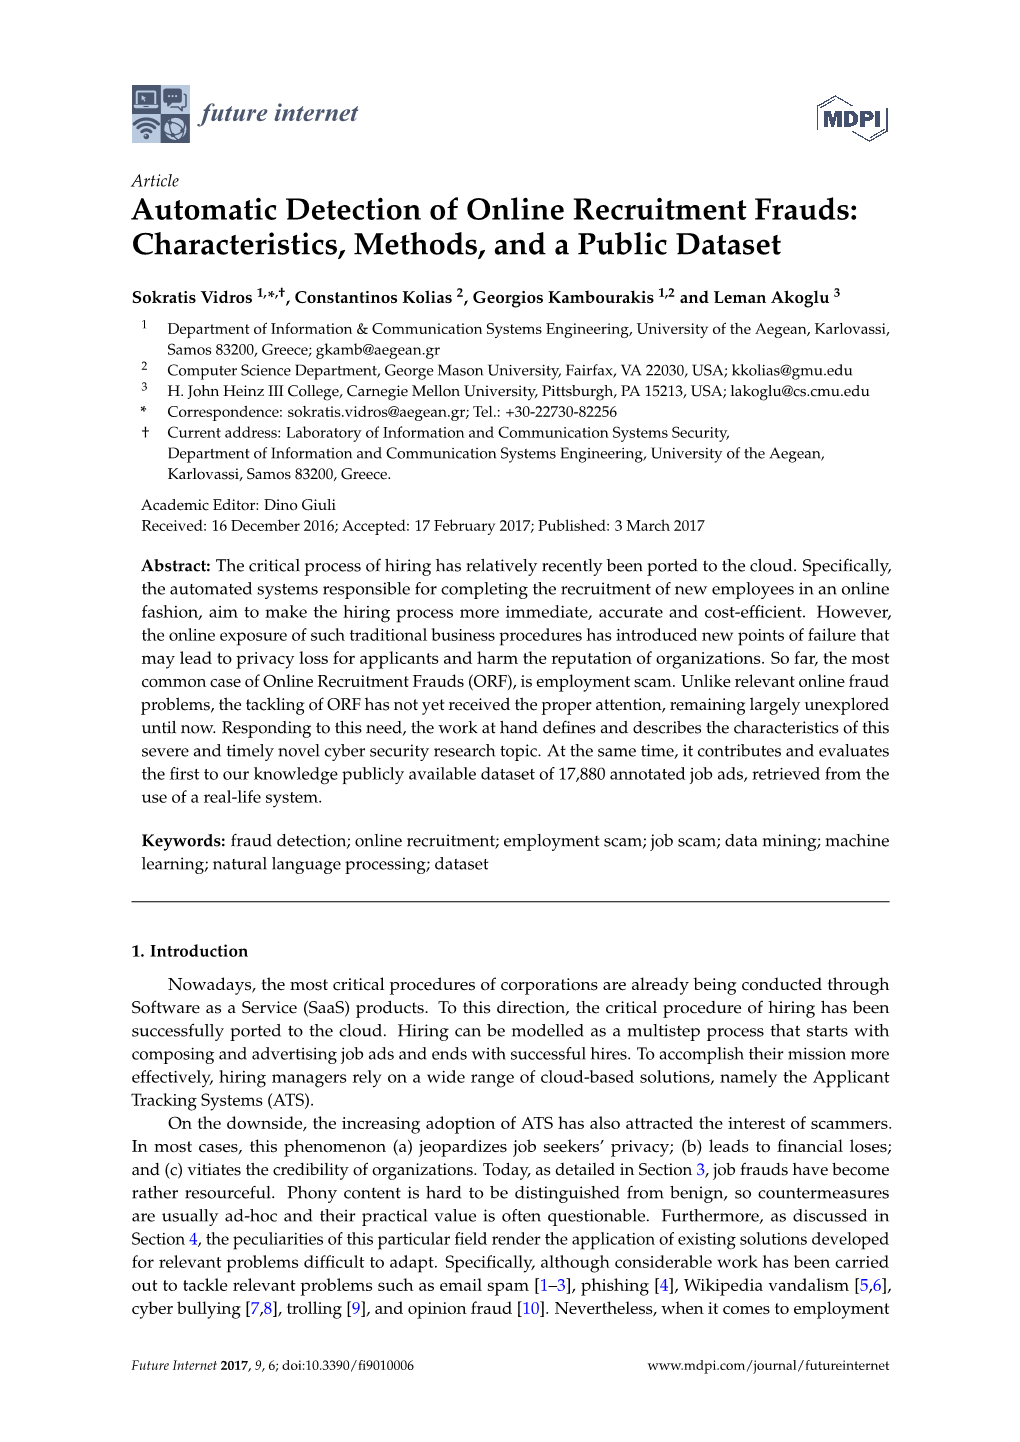 Automatic Detection of Online Recruitment Frauds: Characteristics, Methods, and a Public Dataset